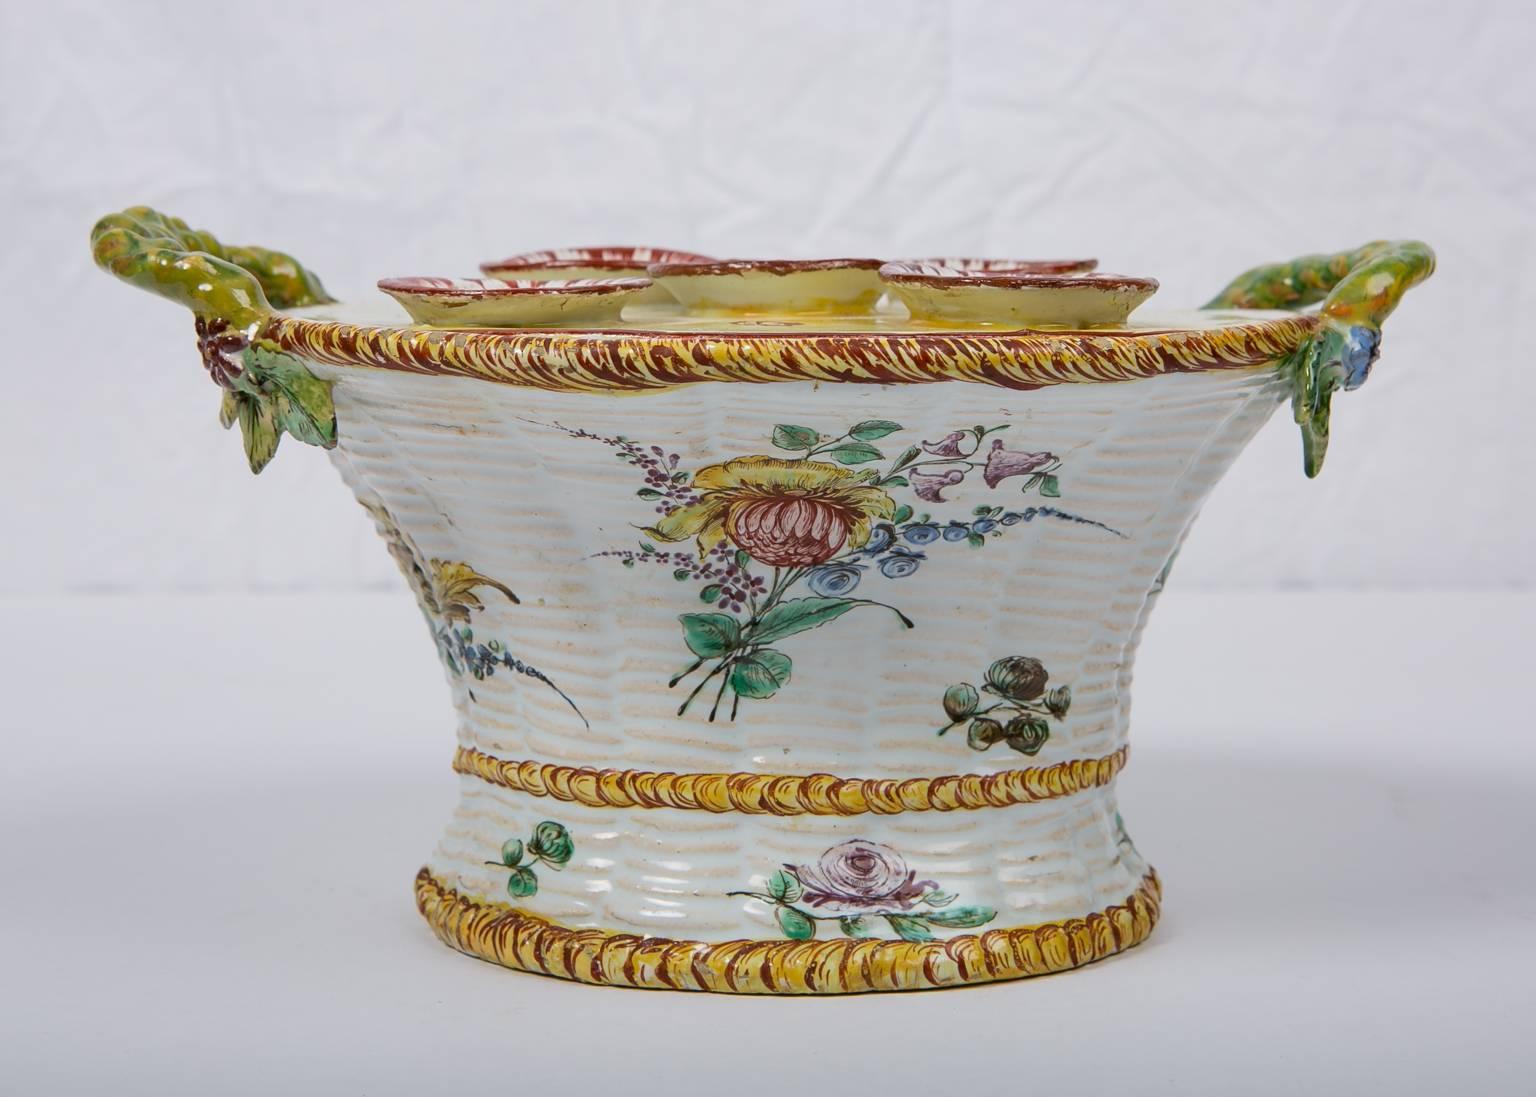 WHY WE LOVE IT: It's beautiful.
We are pleased to offer this French faience planter or bough pot modeled as a flower basket. The top has five openings for small bouquets of flowers or flower branches. It also has four smaller openings for single